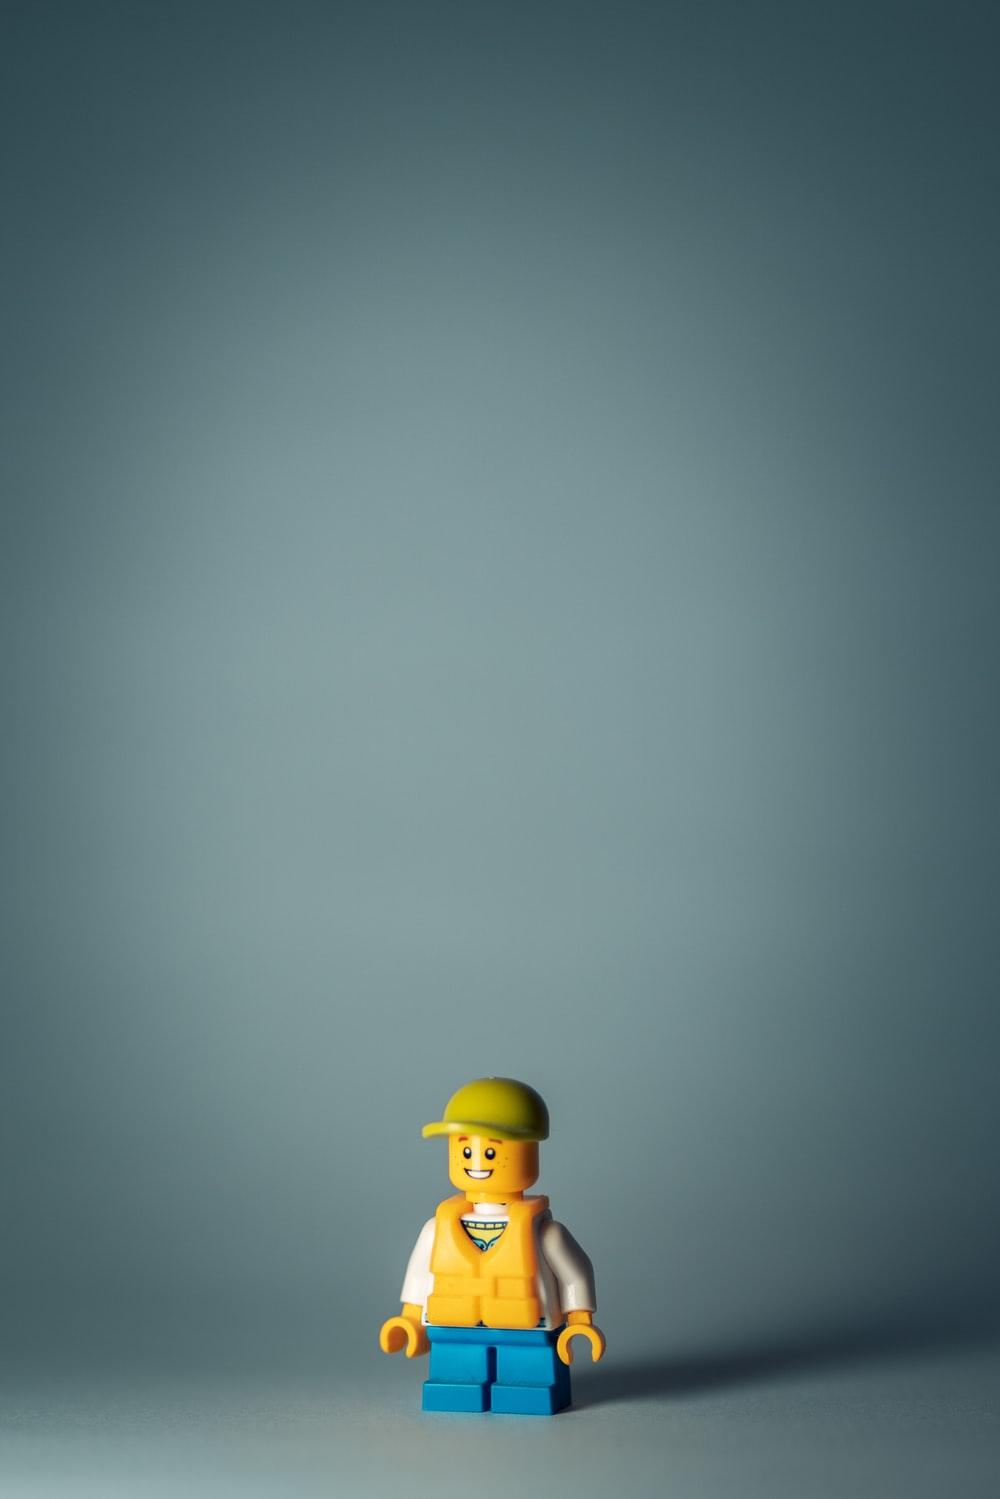 Lego People Wallpapers Top Free Lego People Backgrounds Wallpaperaccess